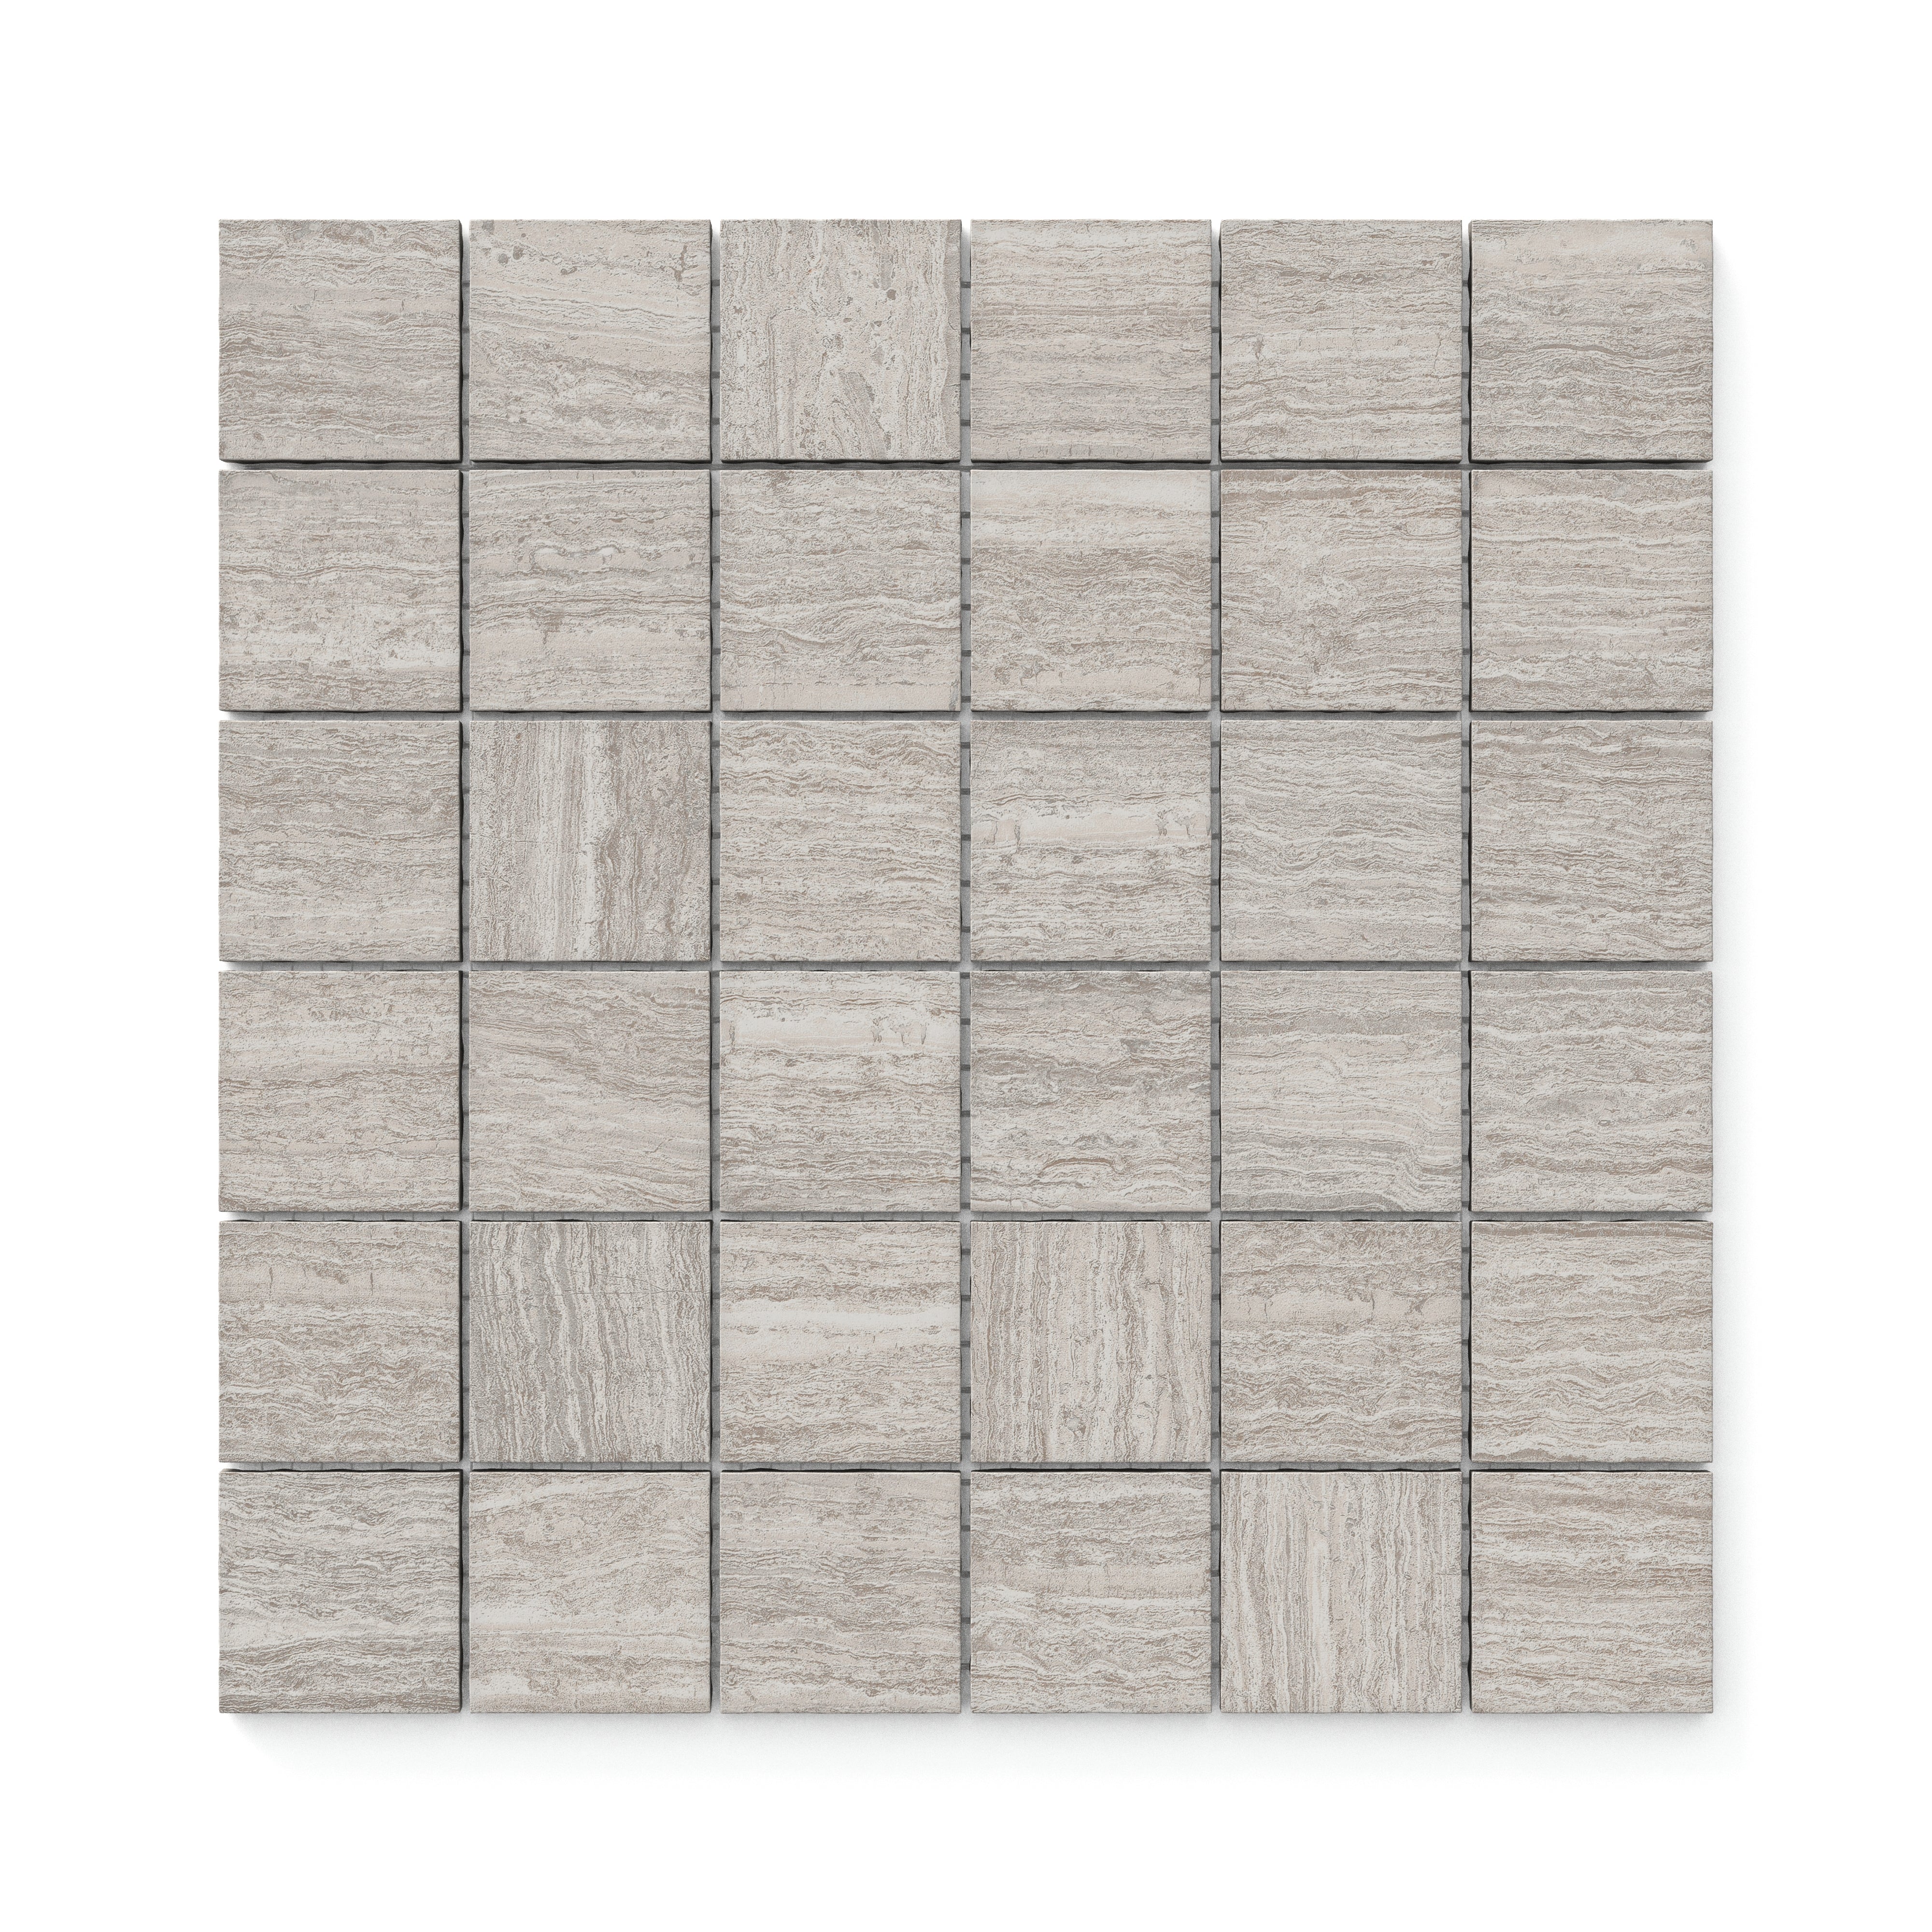 Hendrix 2x2 Matte Porcelain Mosaic Tile in Taupe